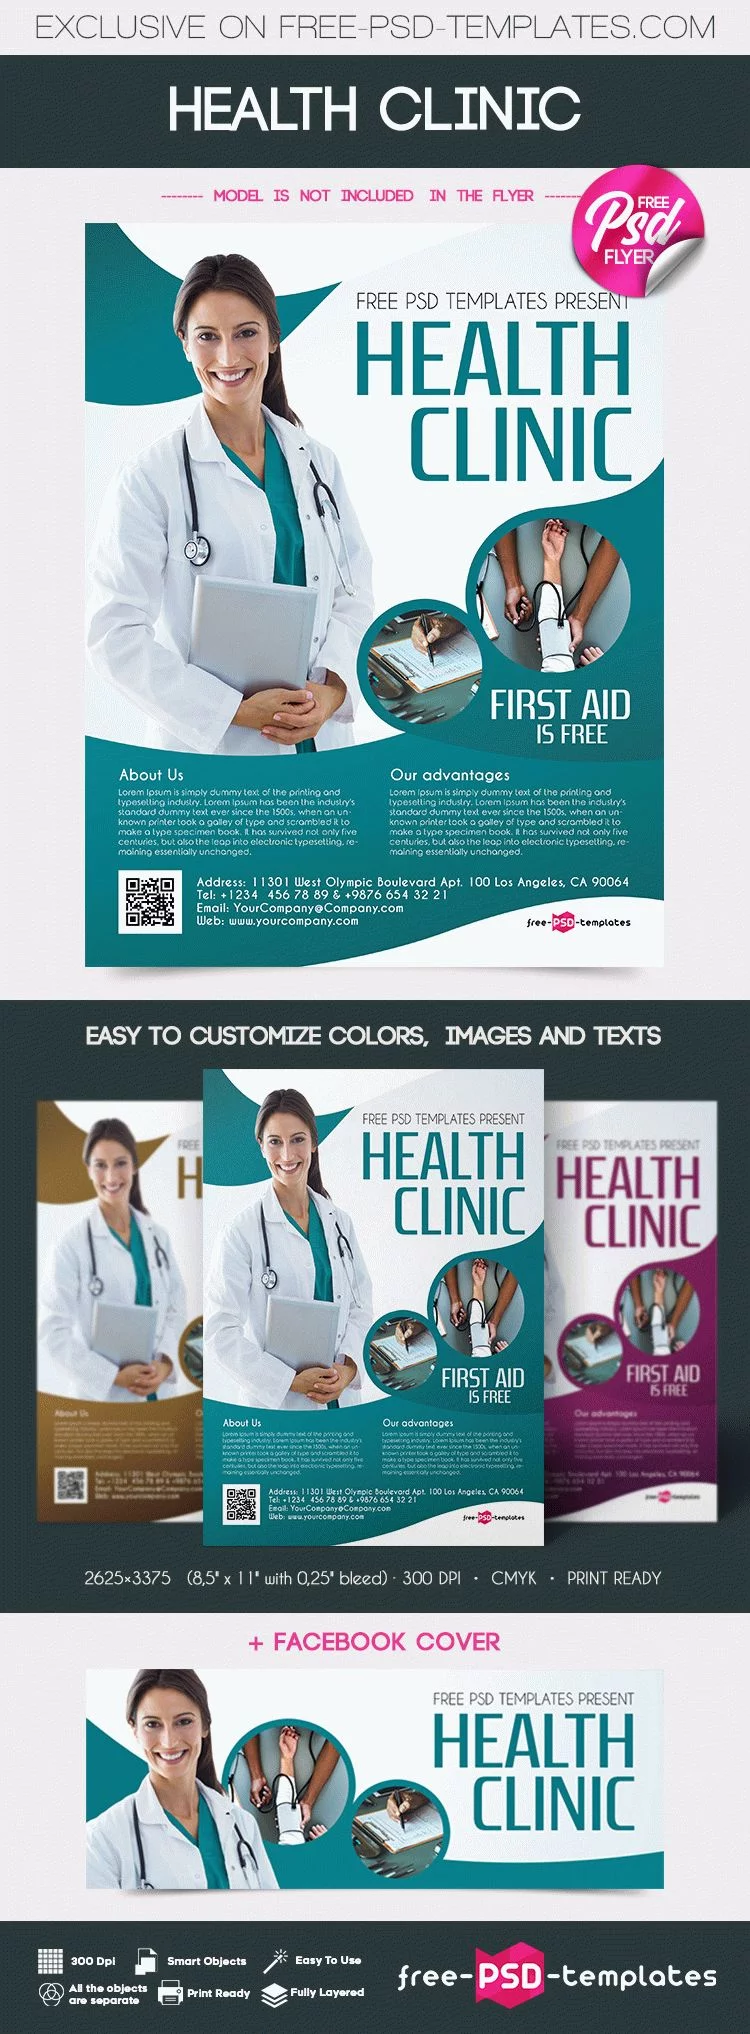 Free Health Clinic Flyer in PSD